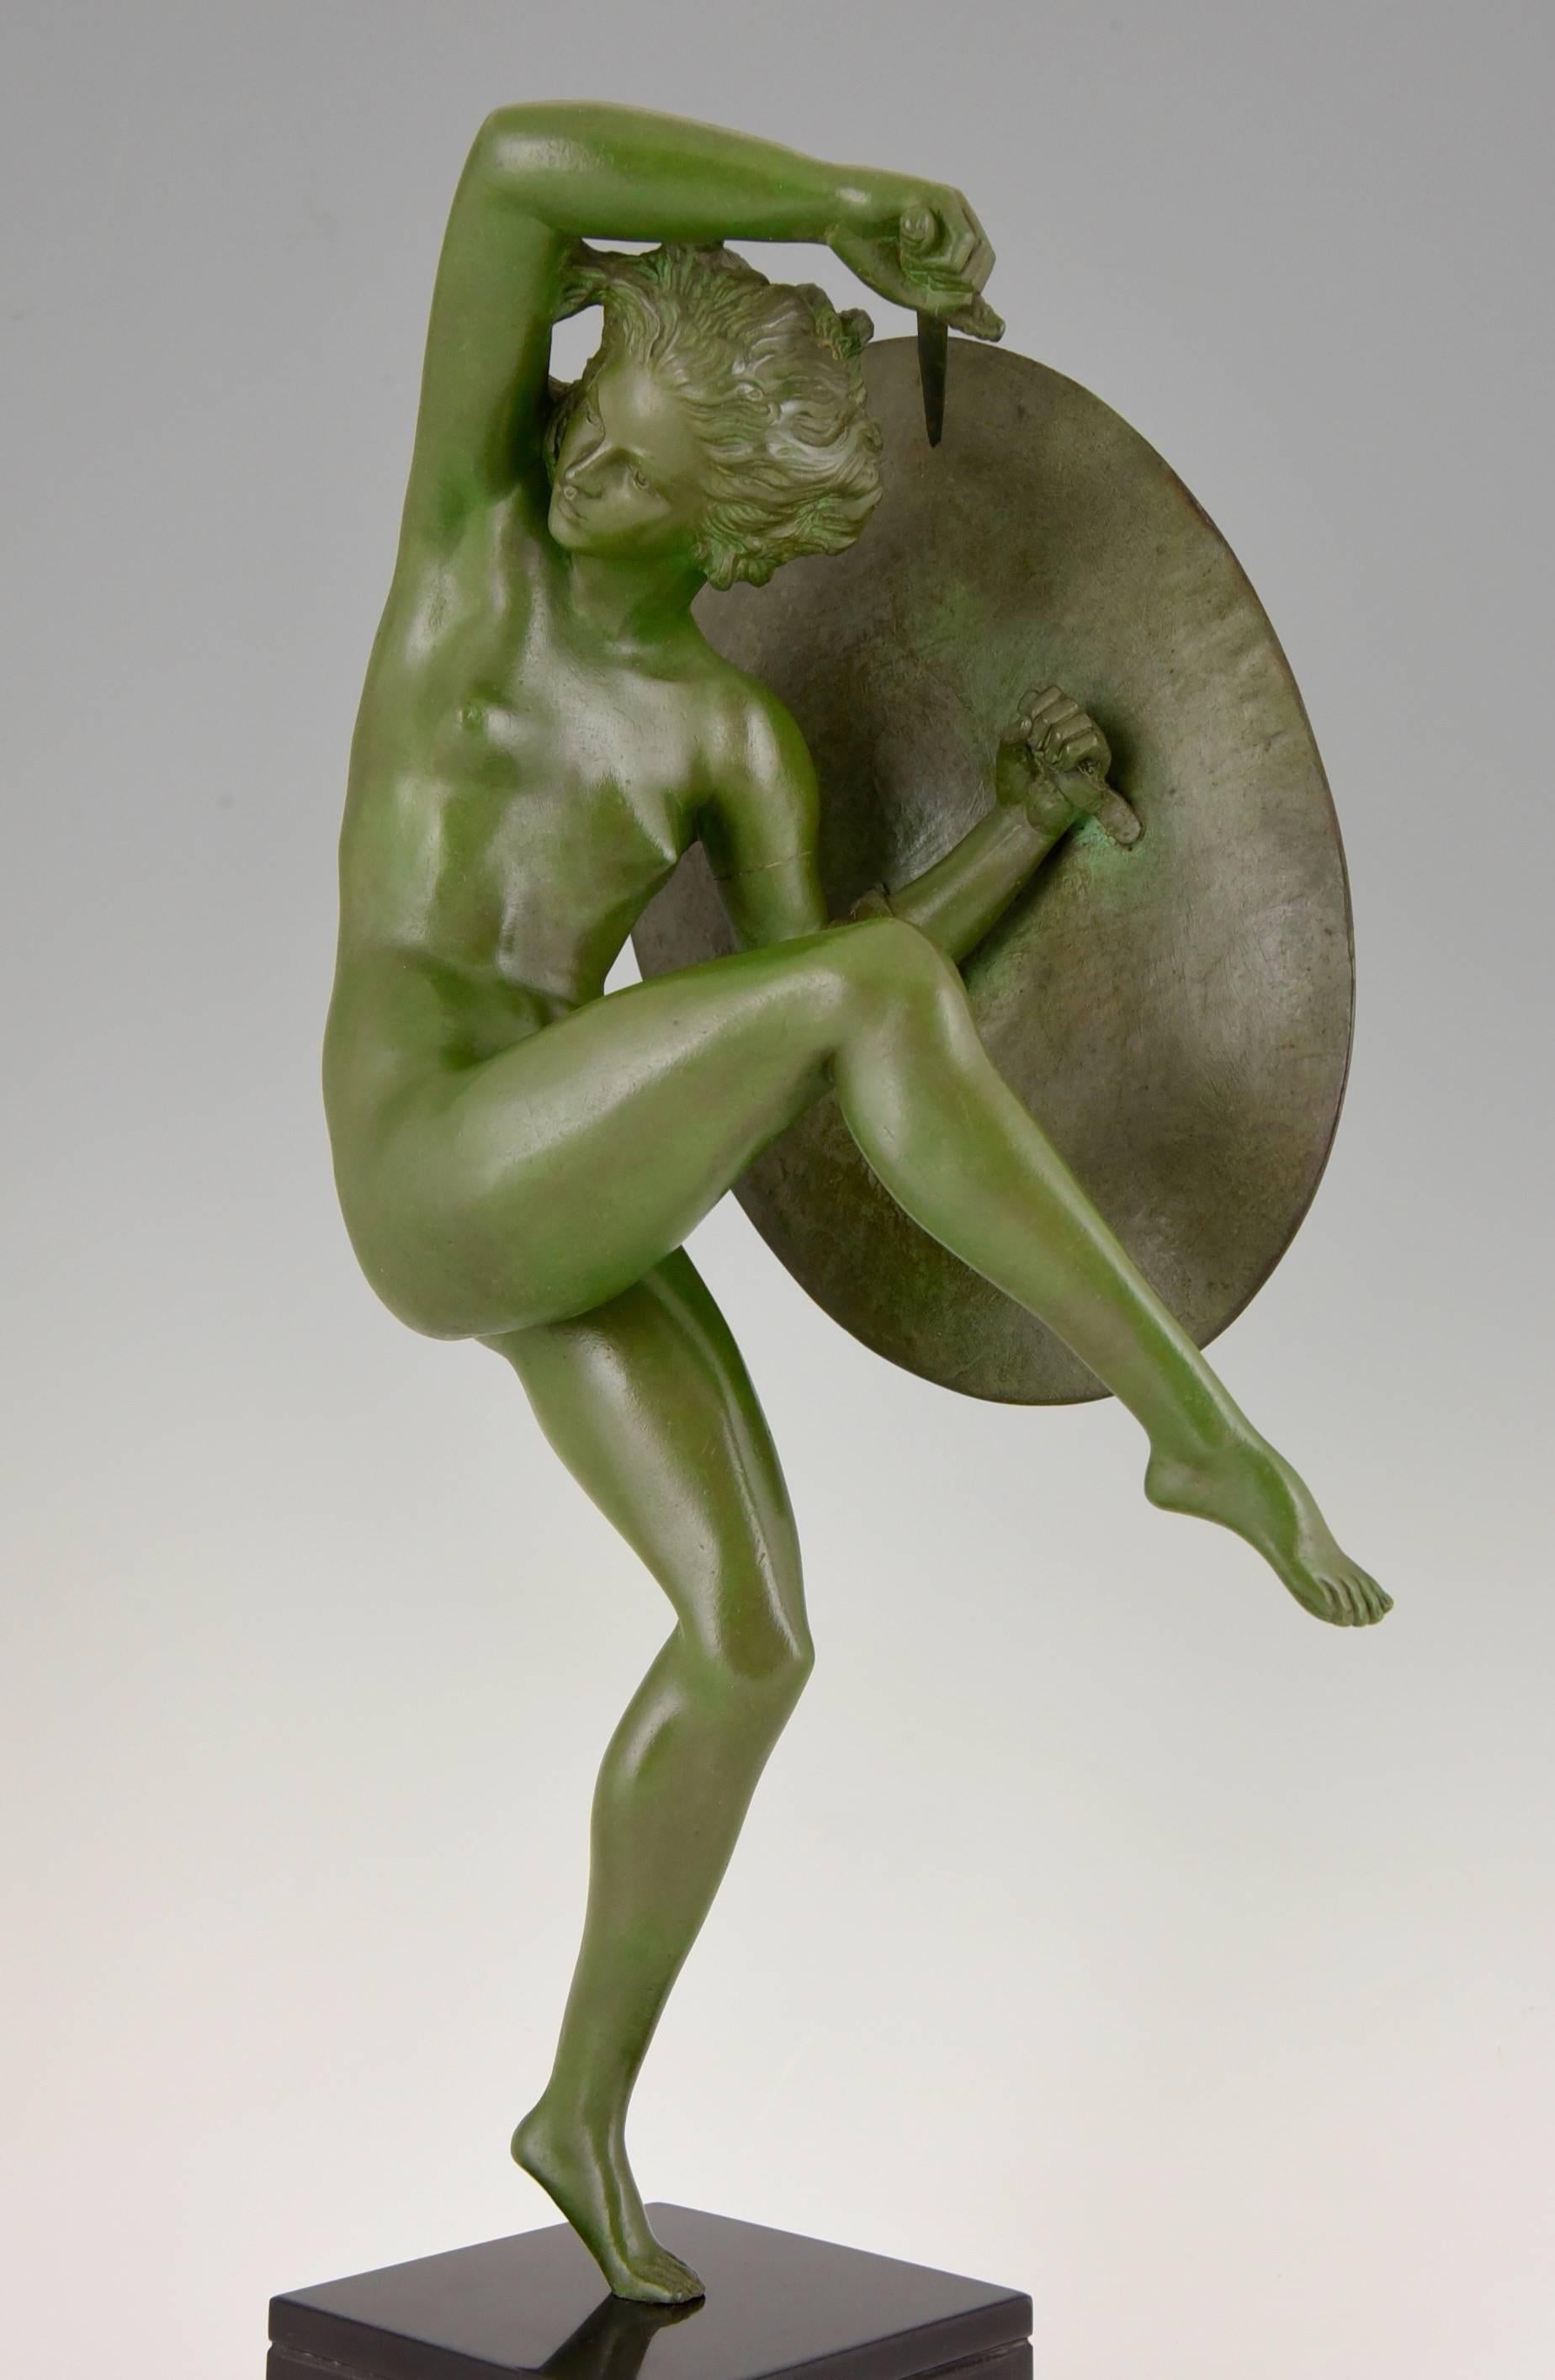 Title:  Athena.
Description: Dancing nude holding a sword and a shield with a central mask. 
Artist/Maker: Marcel André Bouraine, 1886-1948. 
Signature/Marks: Bouraine , Stamped “bronze”.
Style:  Art Deco. 
Date:  circa 1930
Material: